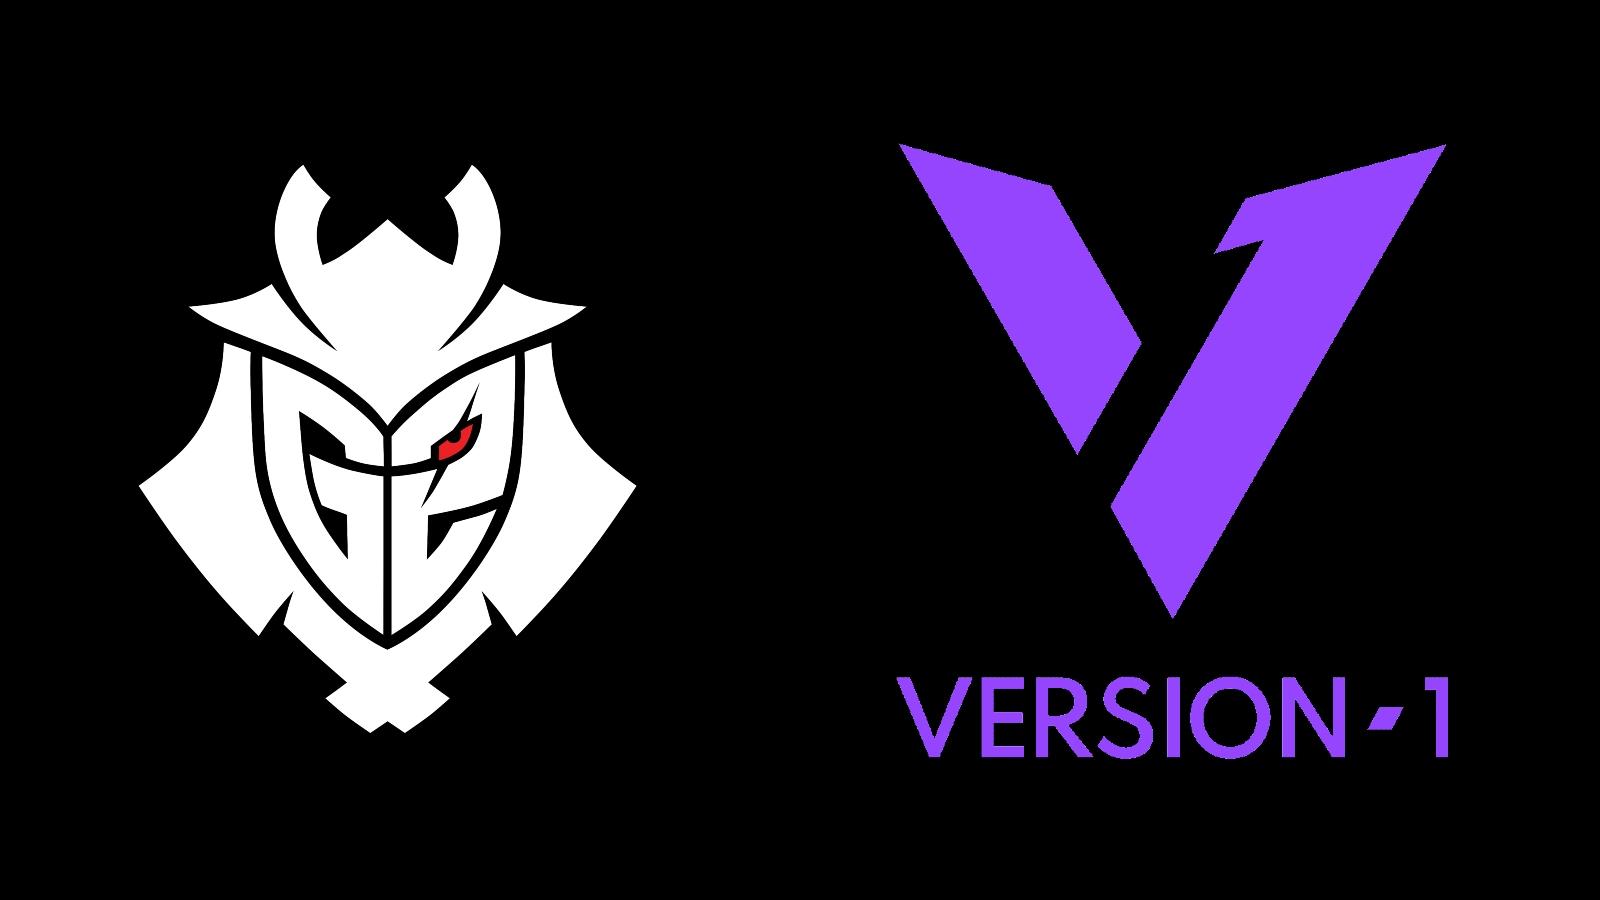 G2 and Version1 logos on black background